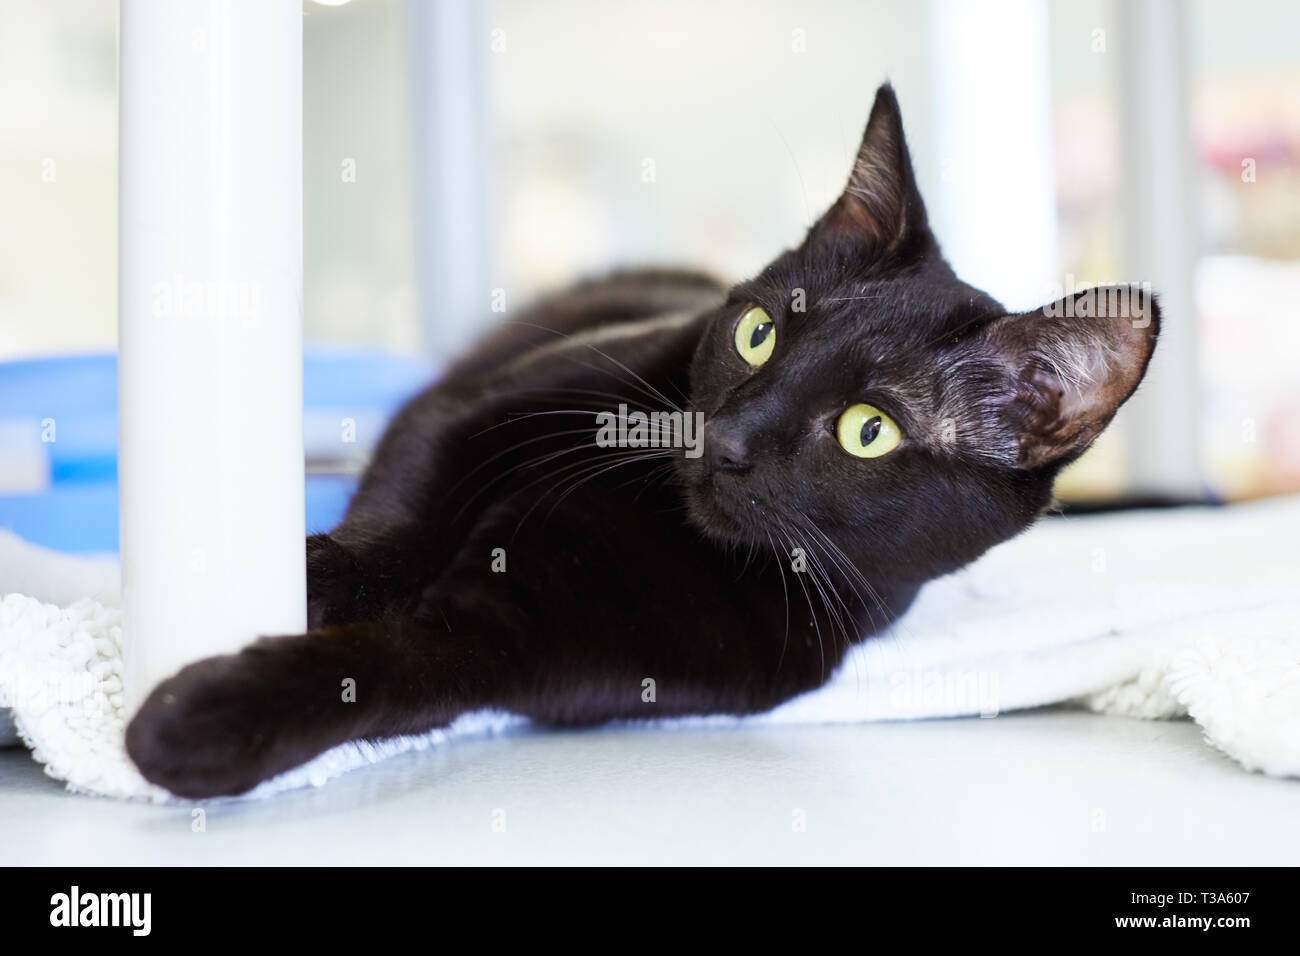 A sweet and very friendly black cat is rolling and making biscuits and feels happy and relaxed Stock Photo